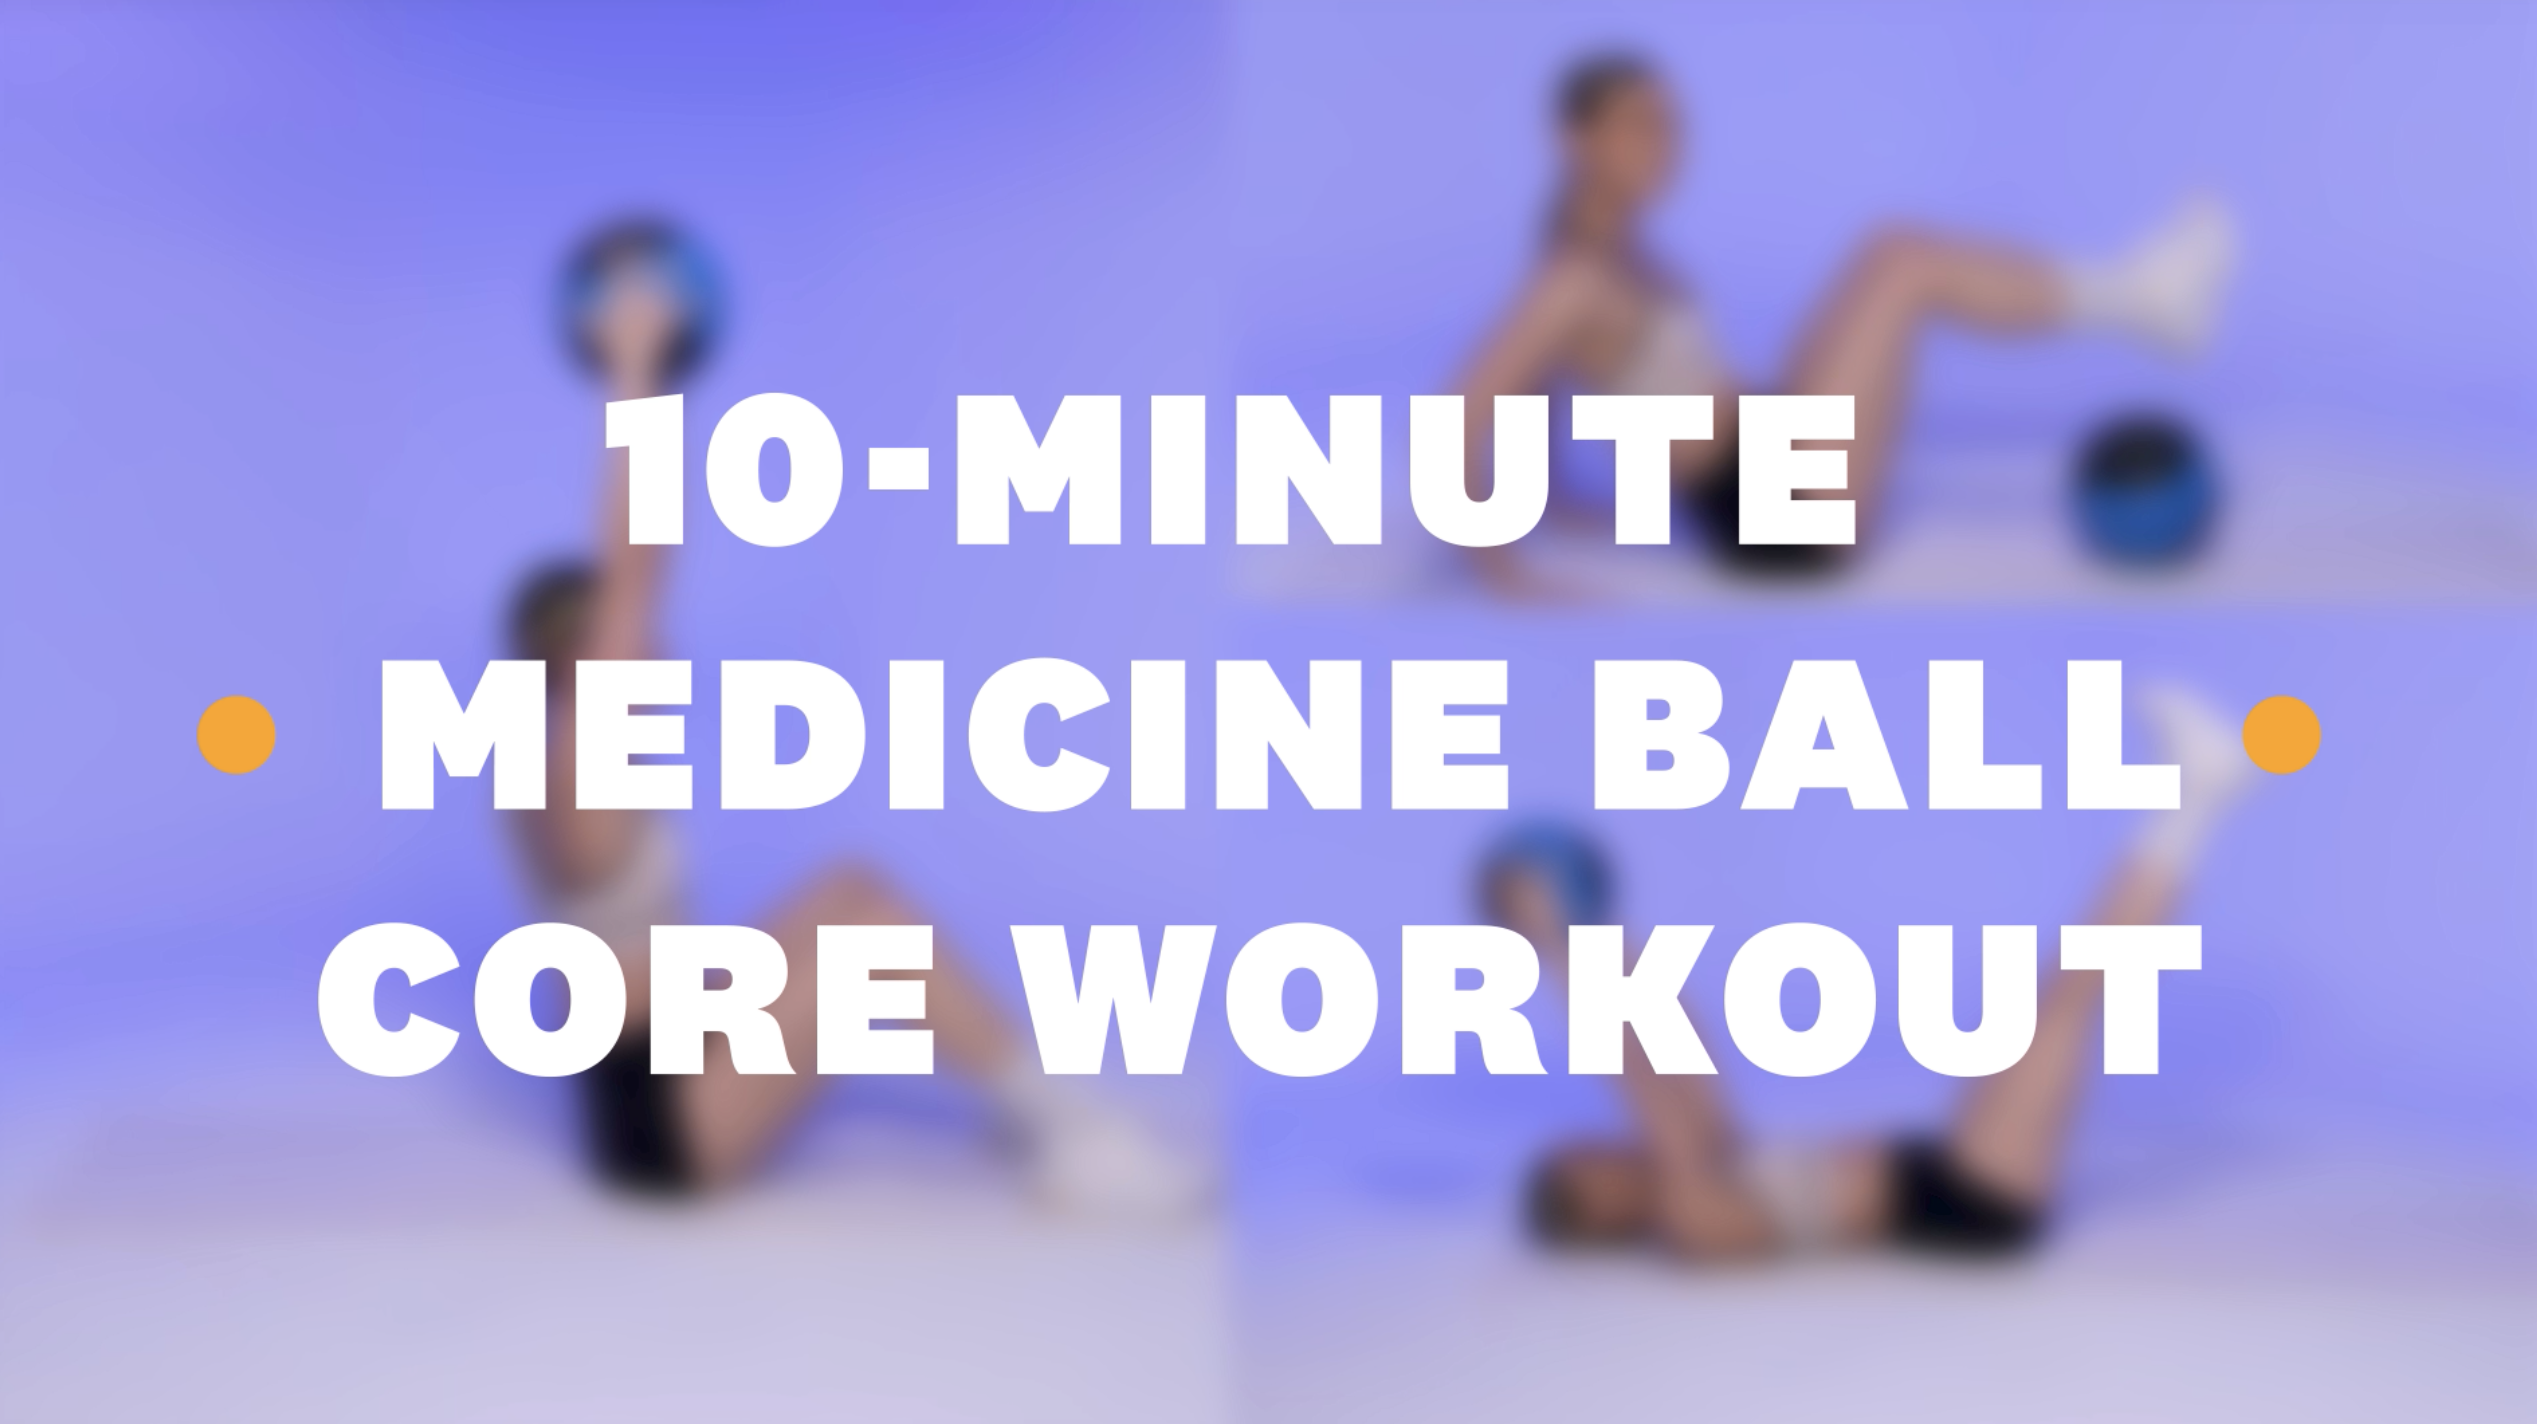 20-Minute Core Stability Workout That Doesn't Require Equipment